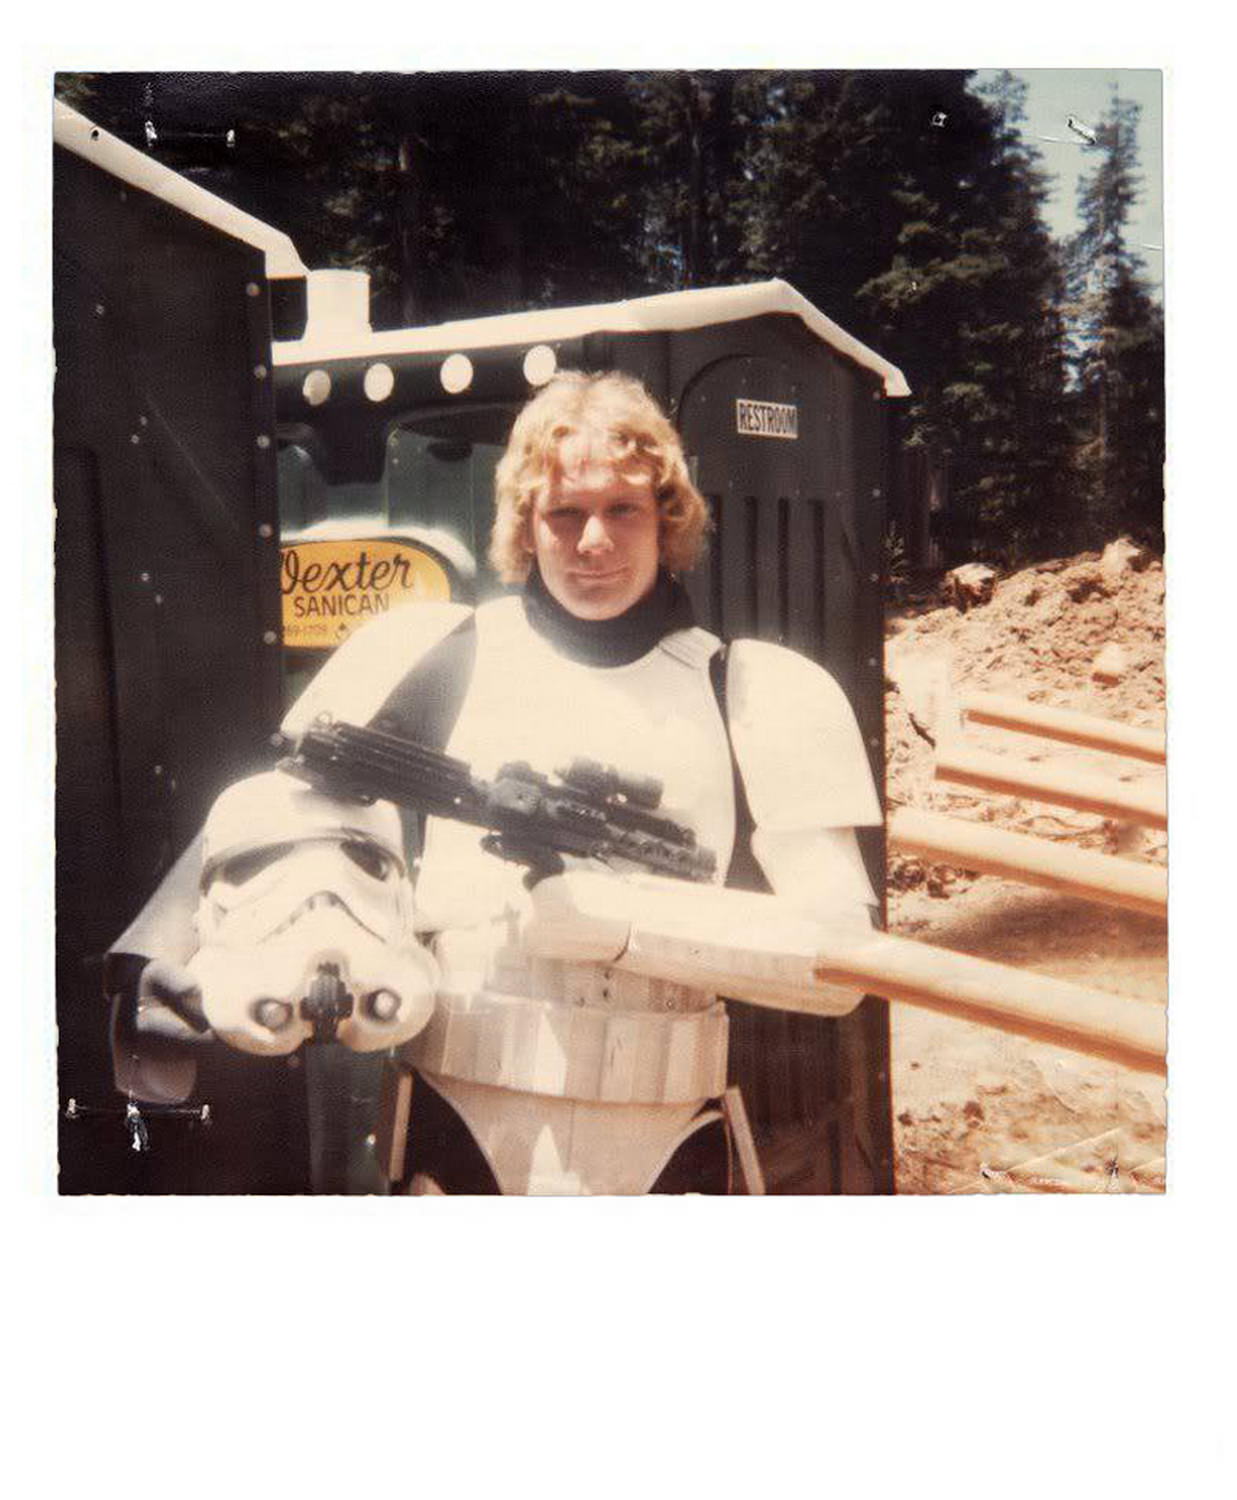 Stormtrooper on the set of Return of the Jedi.